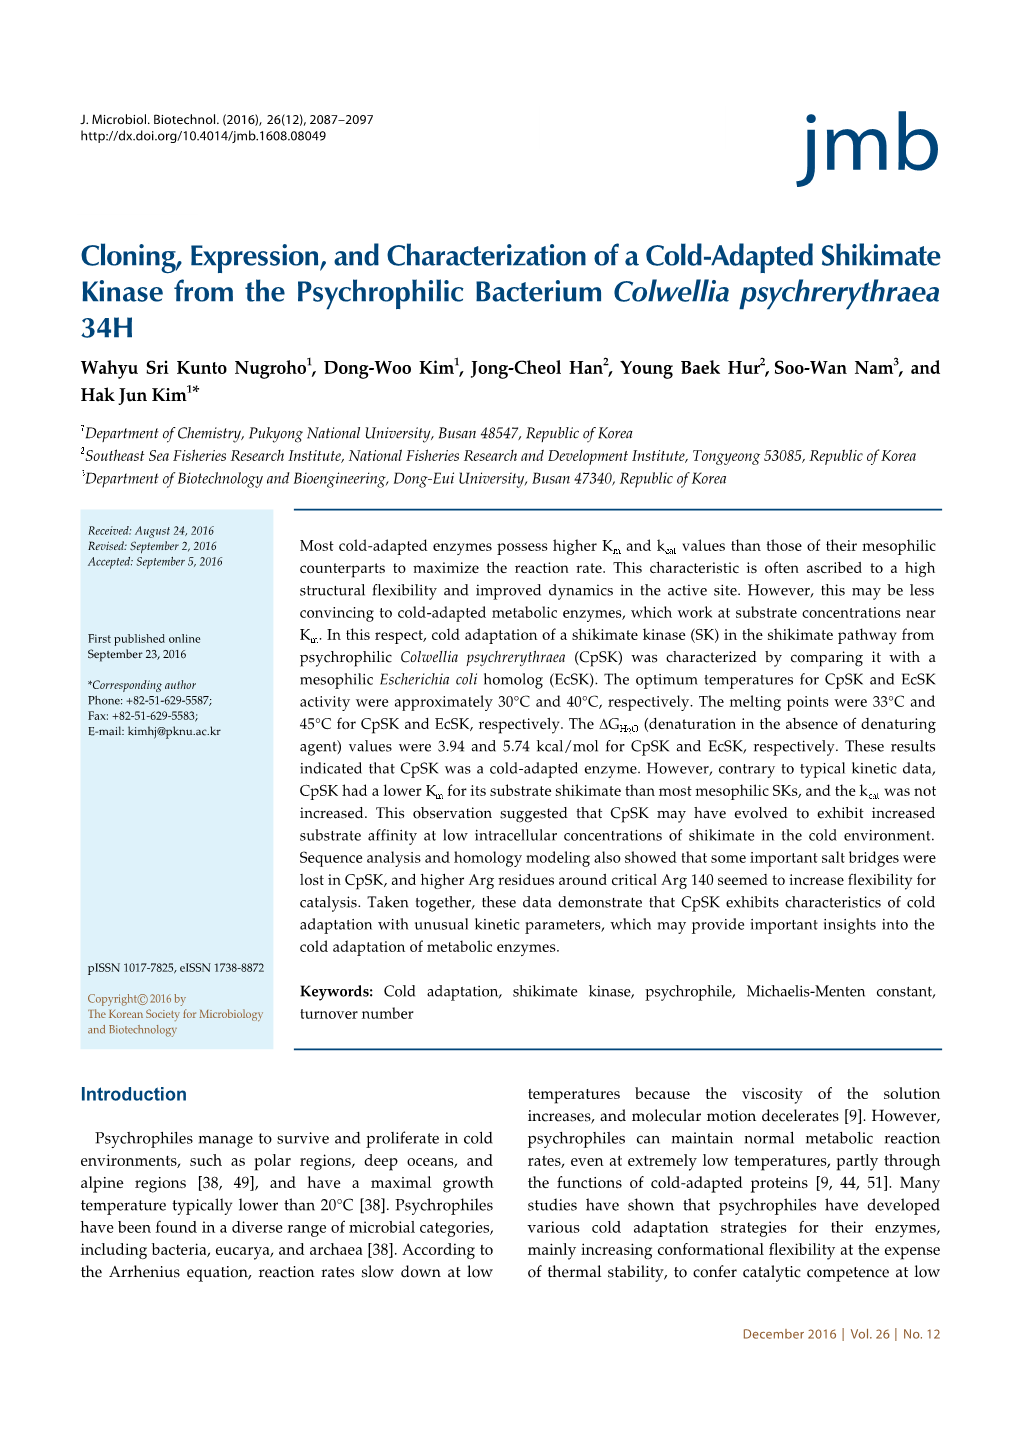 Cloning, Expression, and Characterization of a Cold-Adapted